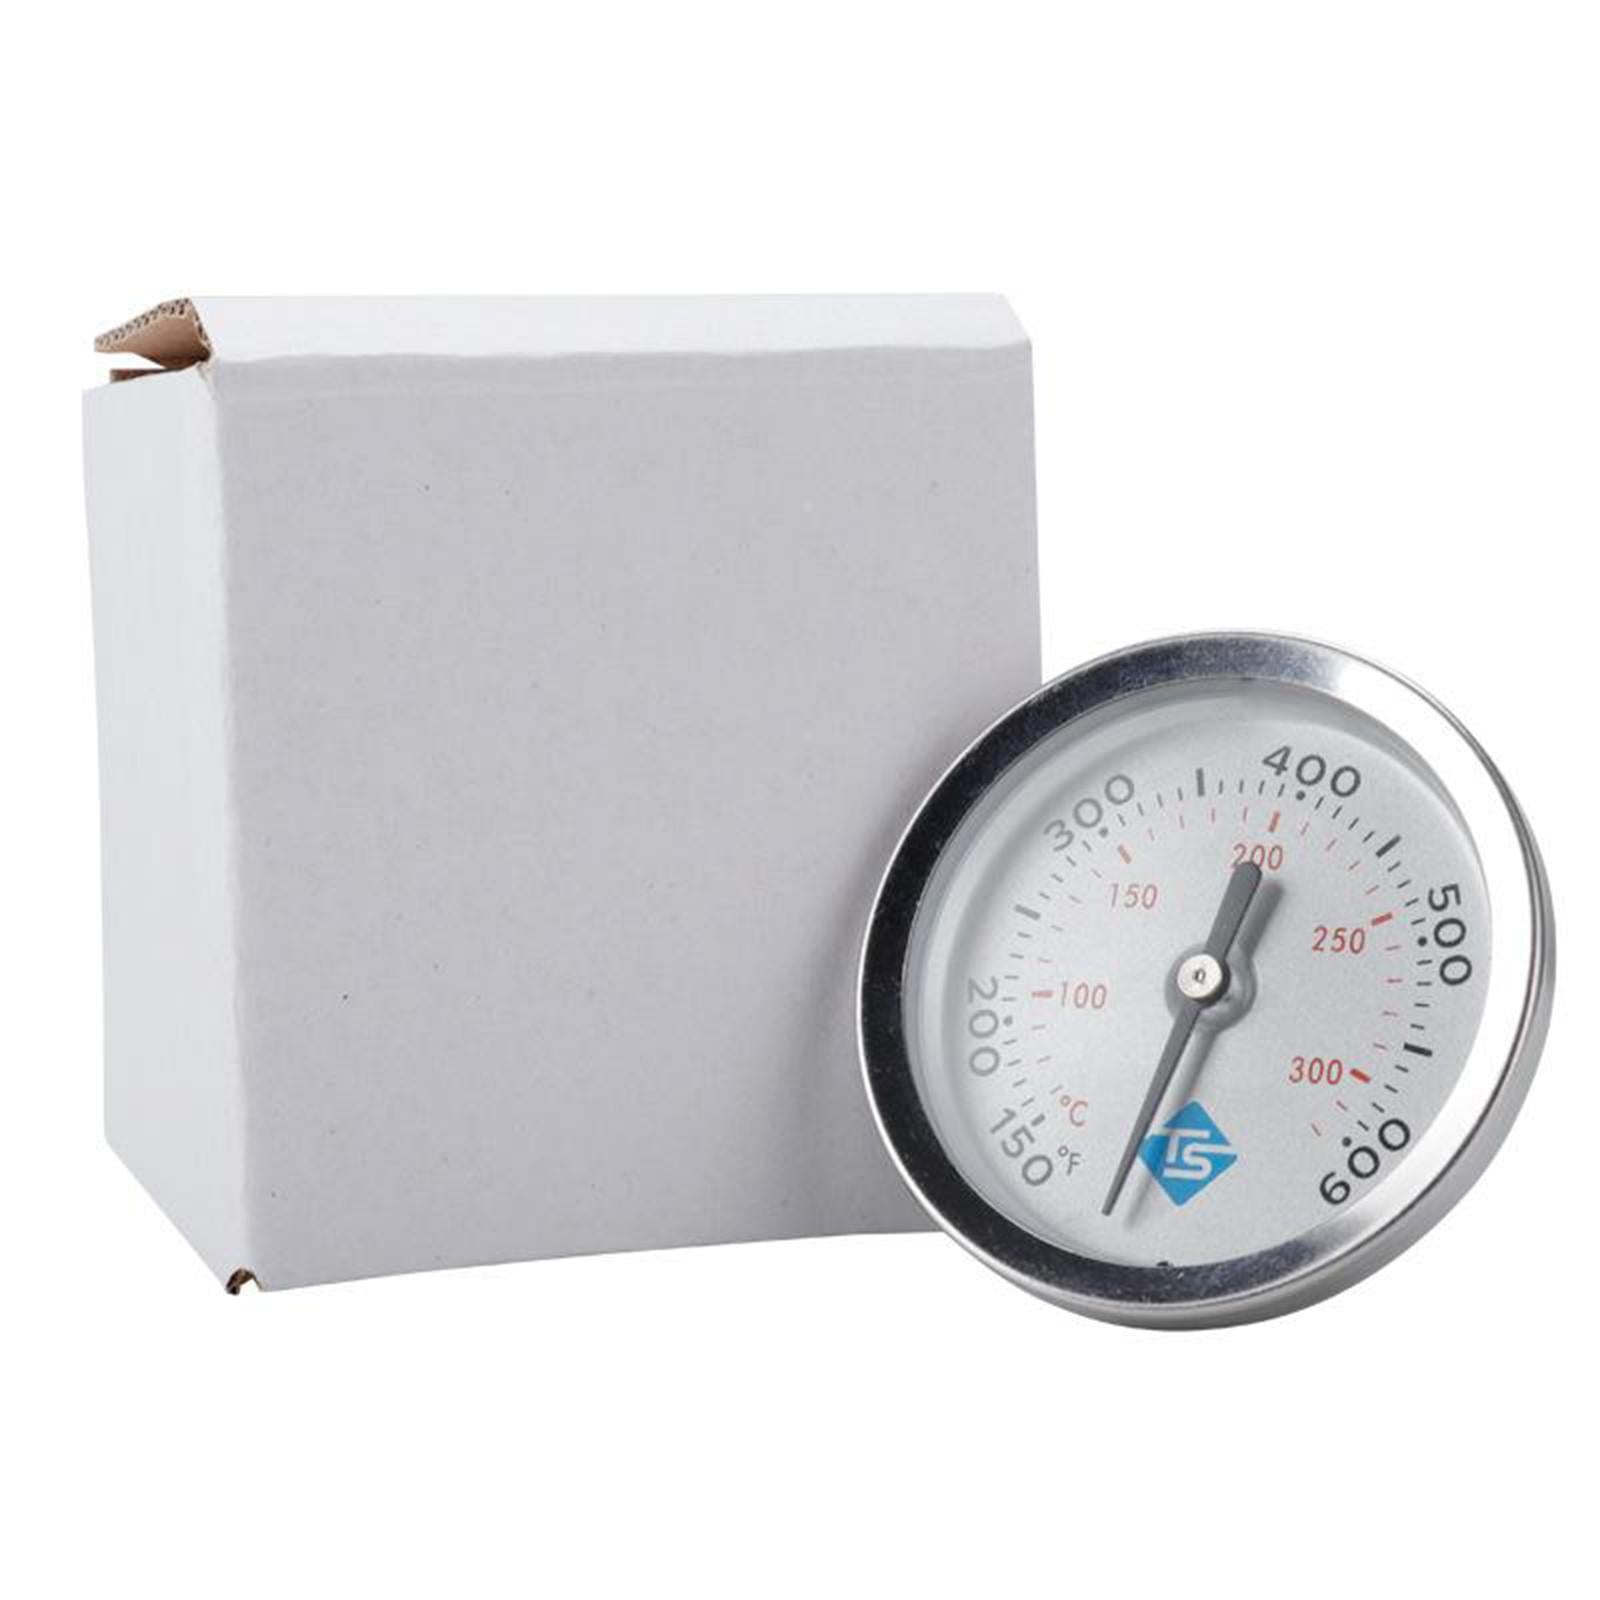 Oven Thermometer Grill Baking Cooking Temps Gauge Scale